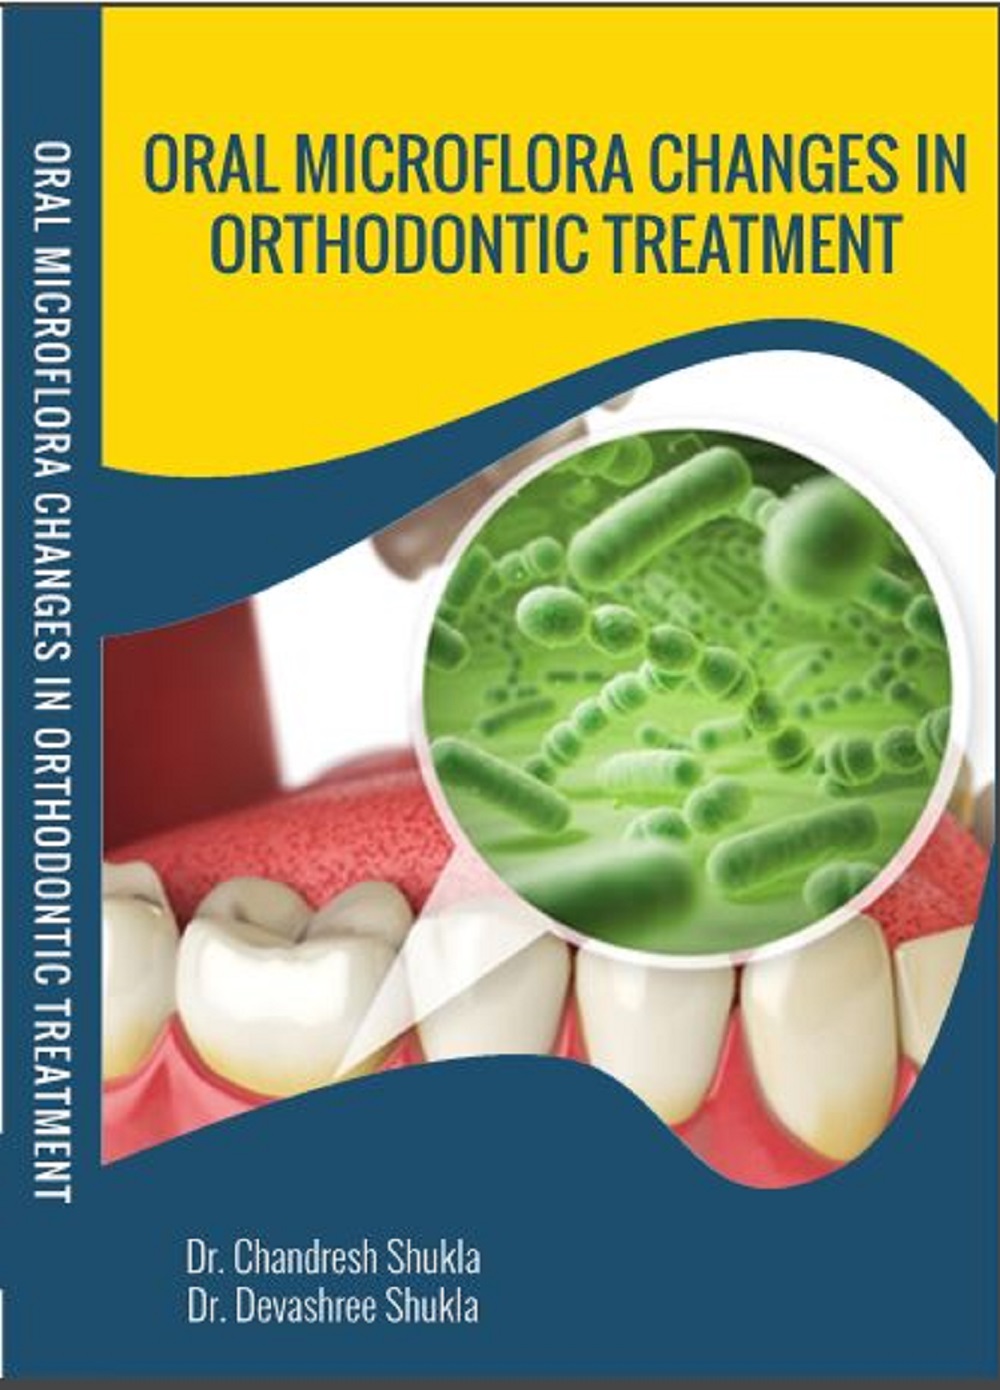 ORAL MICROFLORA CHANGES IN ORTHODONTIC TREATMENT